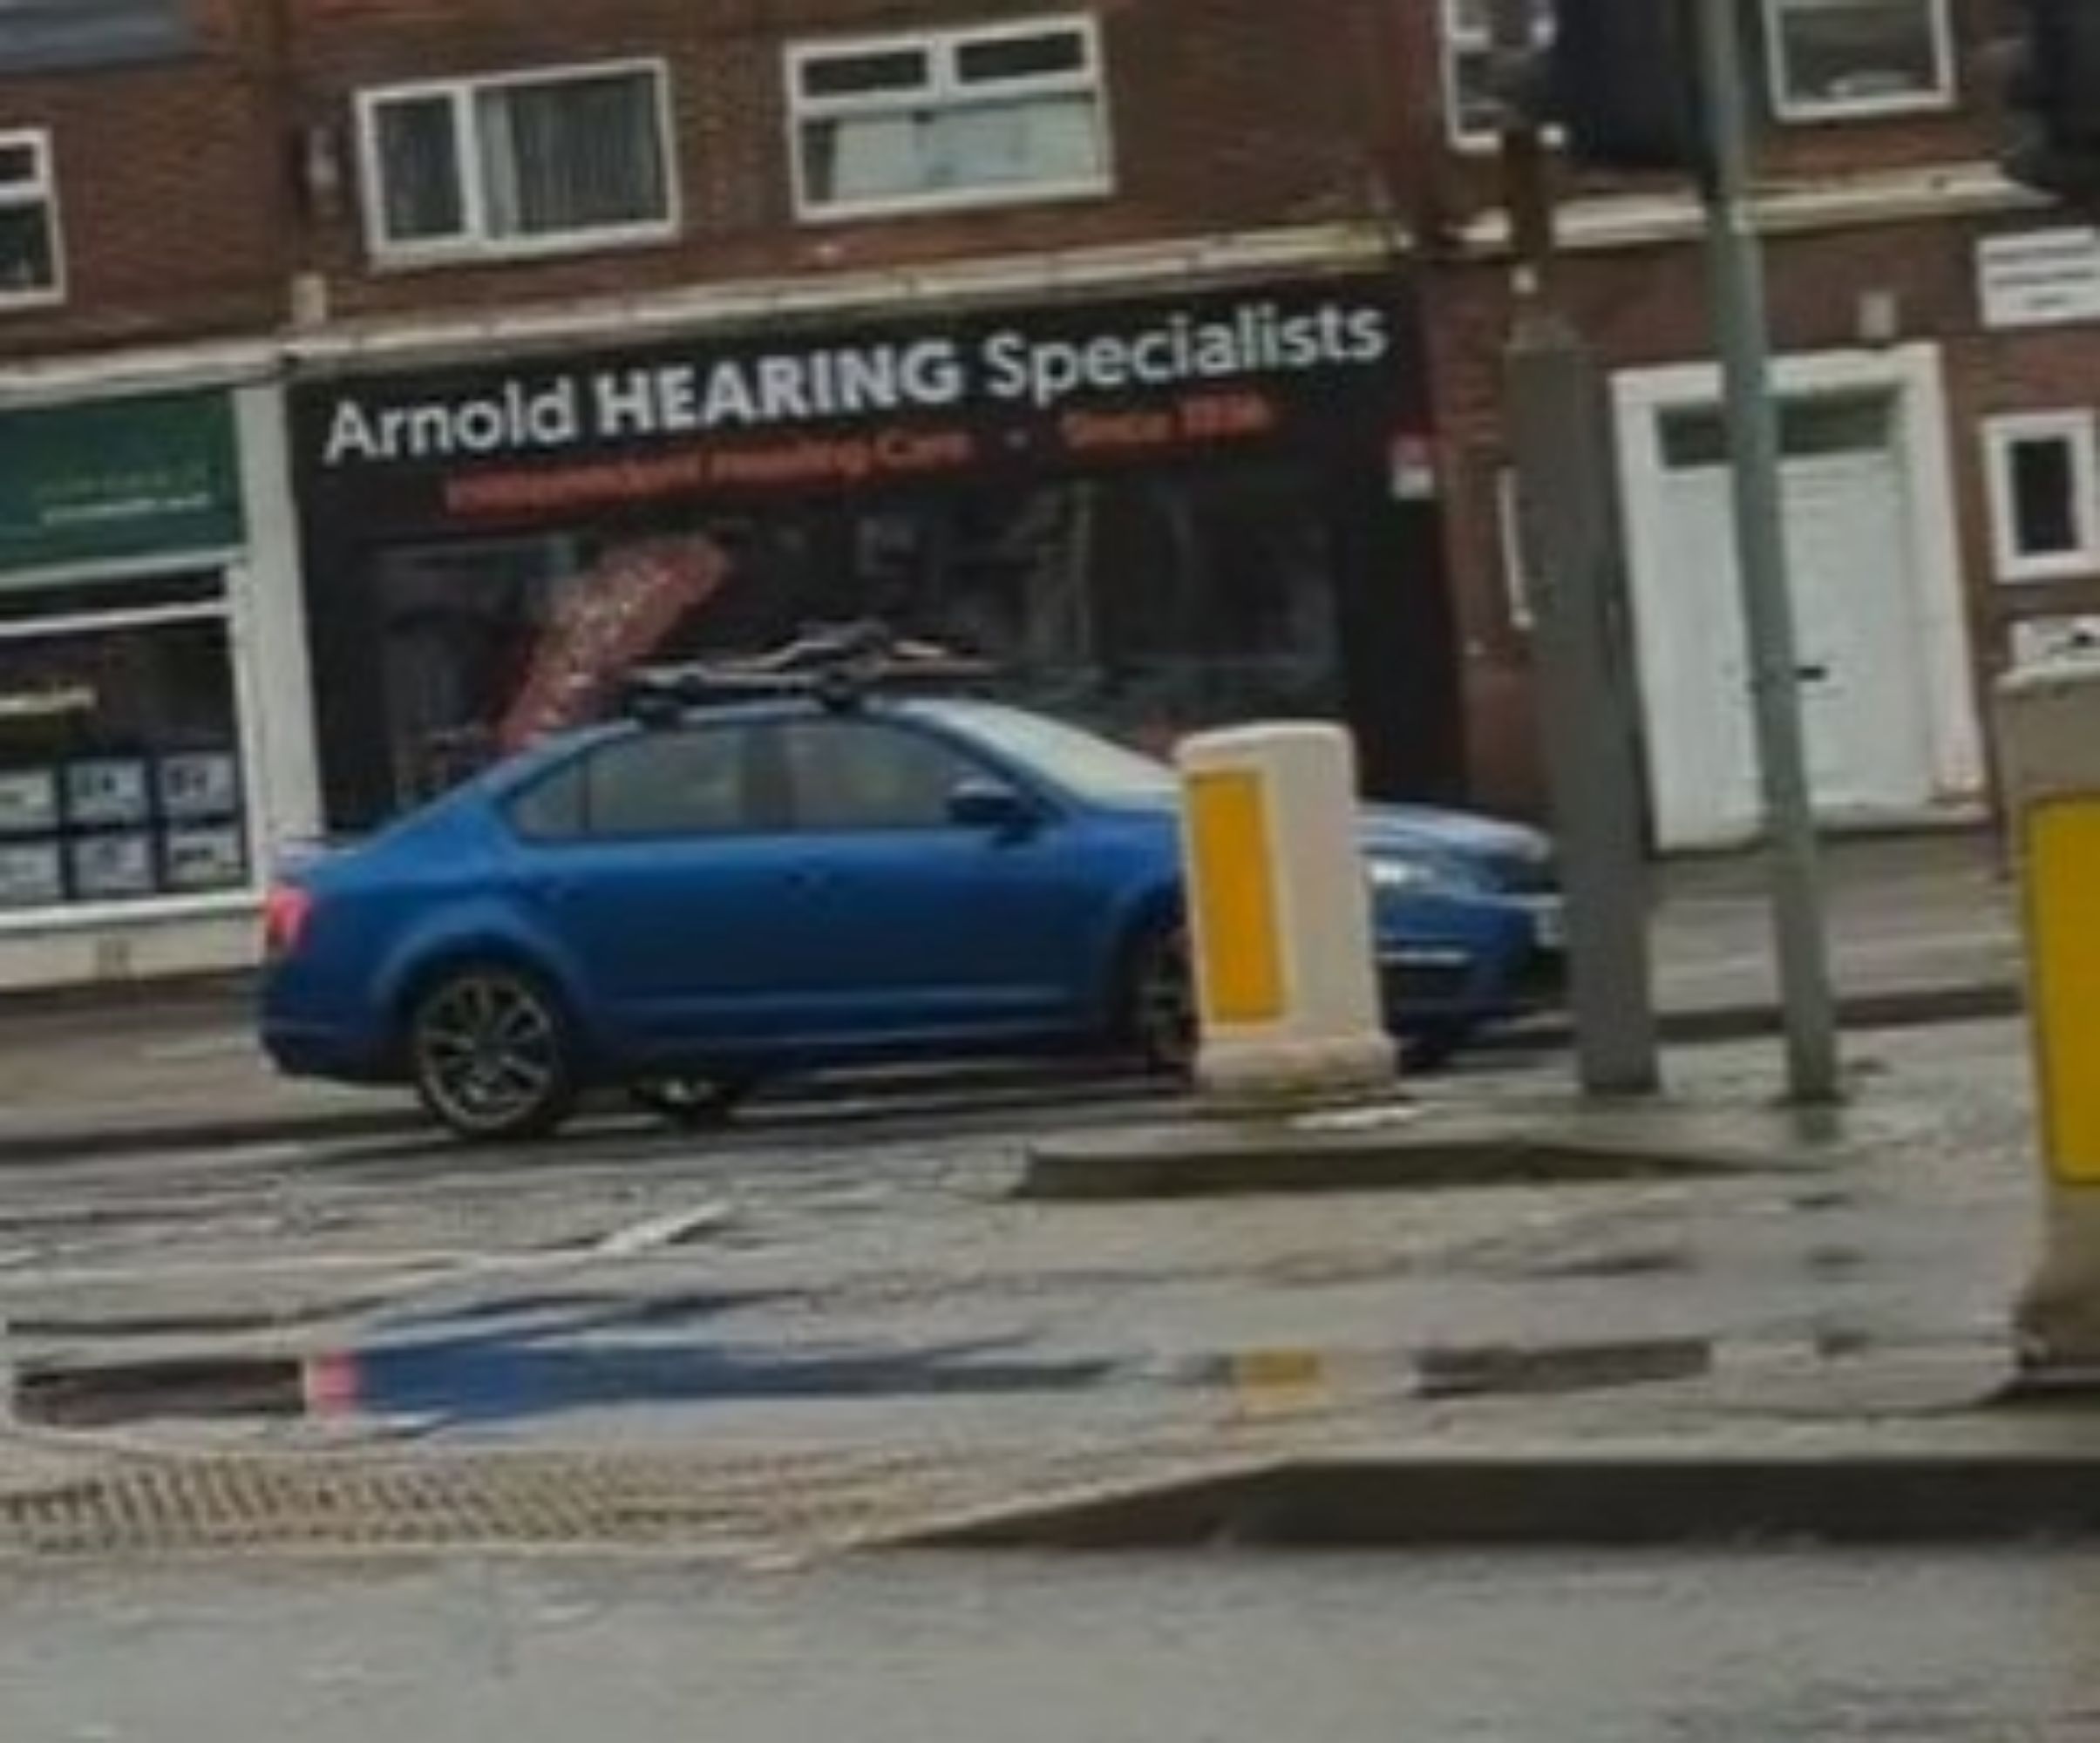 A photo of the Arnold Hearing Specialists shop front, but "hearing" is in all capitals, as if it's being shouted. And yes, this is a little ableist ðŸ˜¥ 